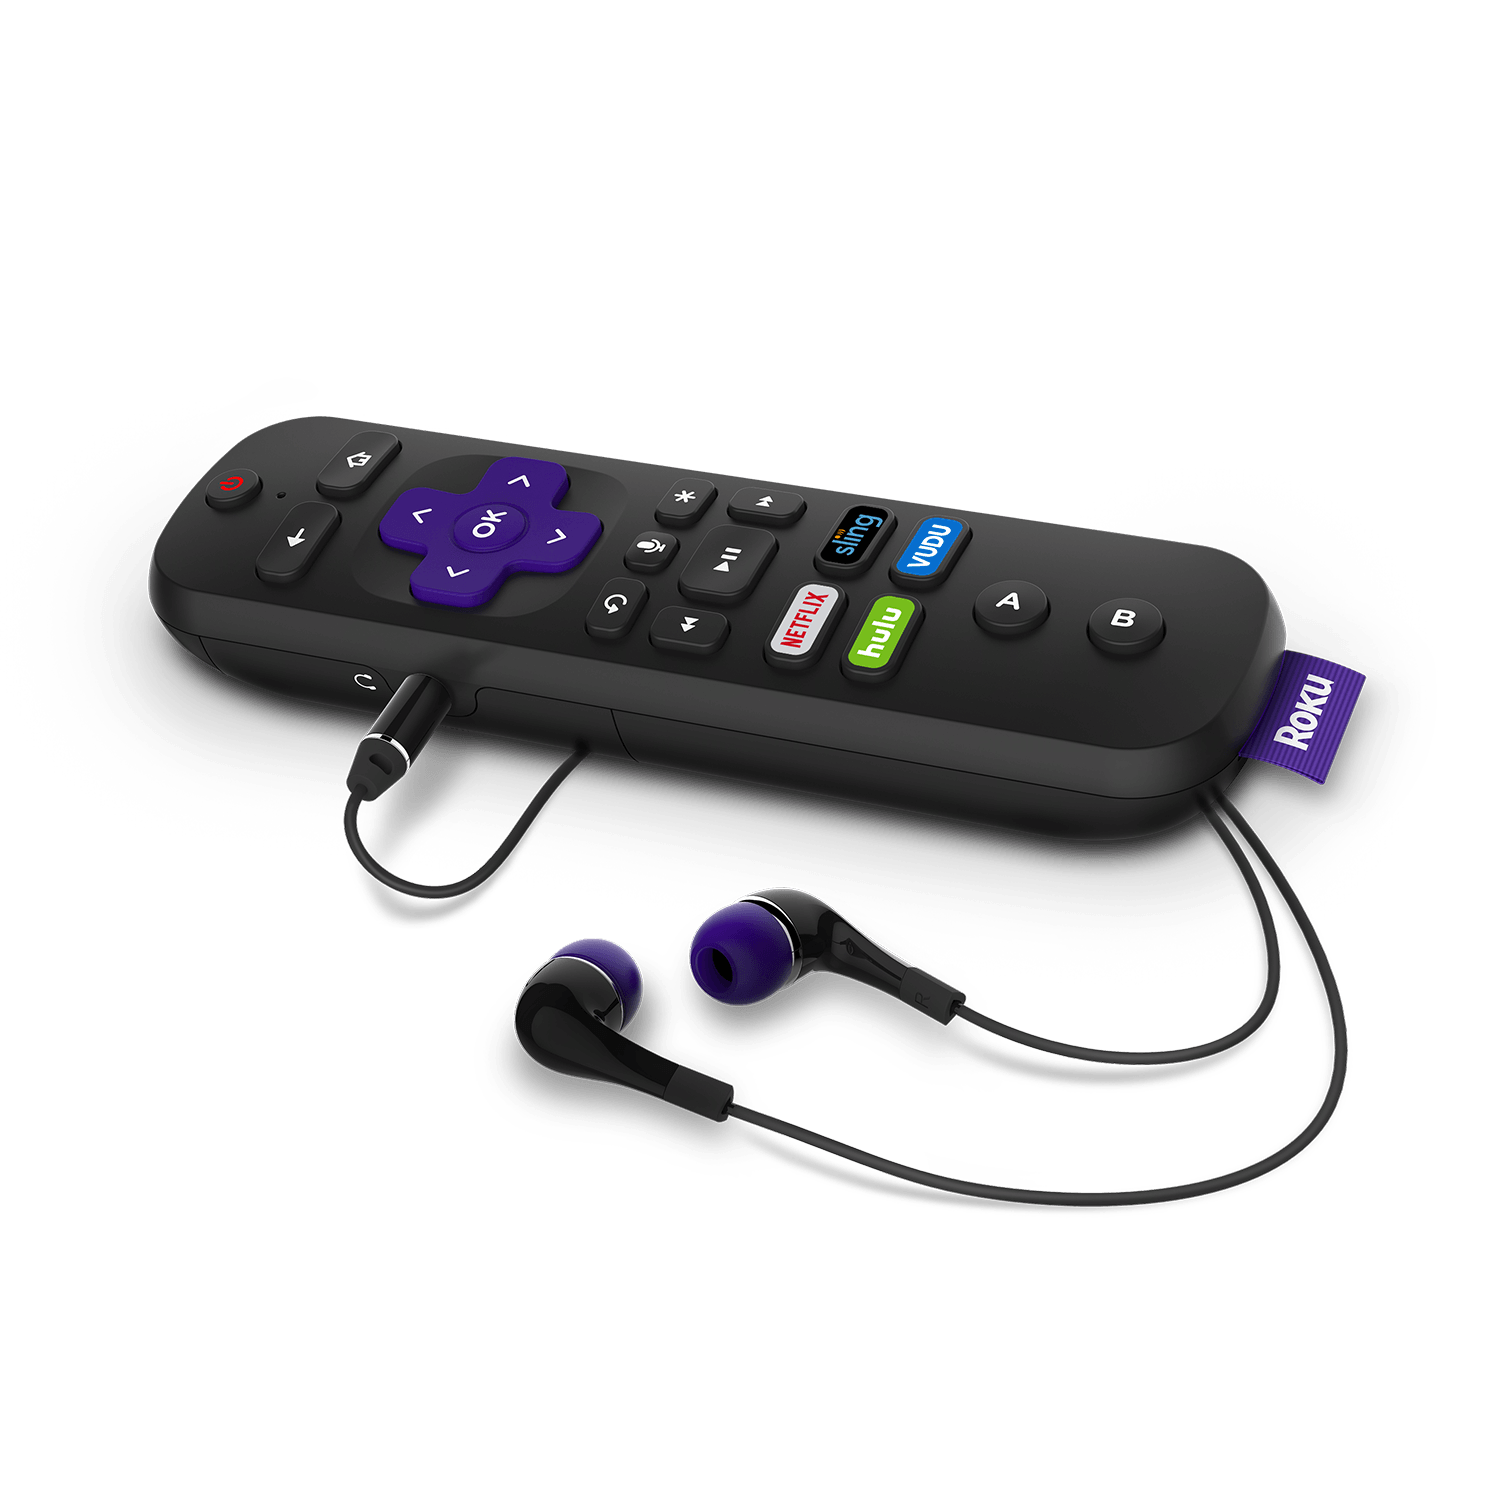 Roku Ultra 4K HDR Streaming Player with voice remote (2017) - image 4 of 8